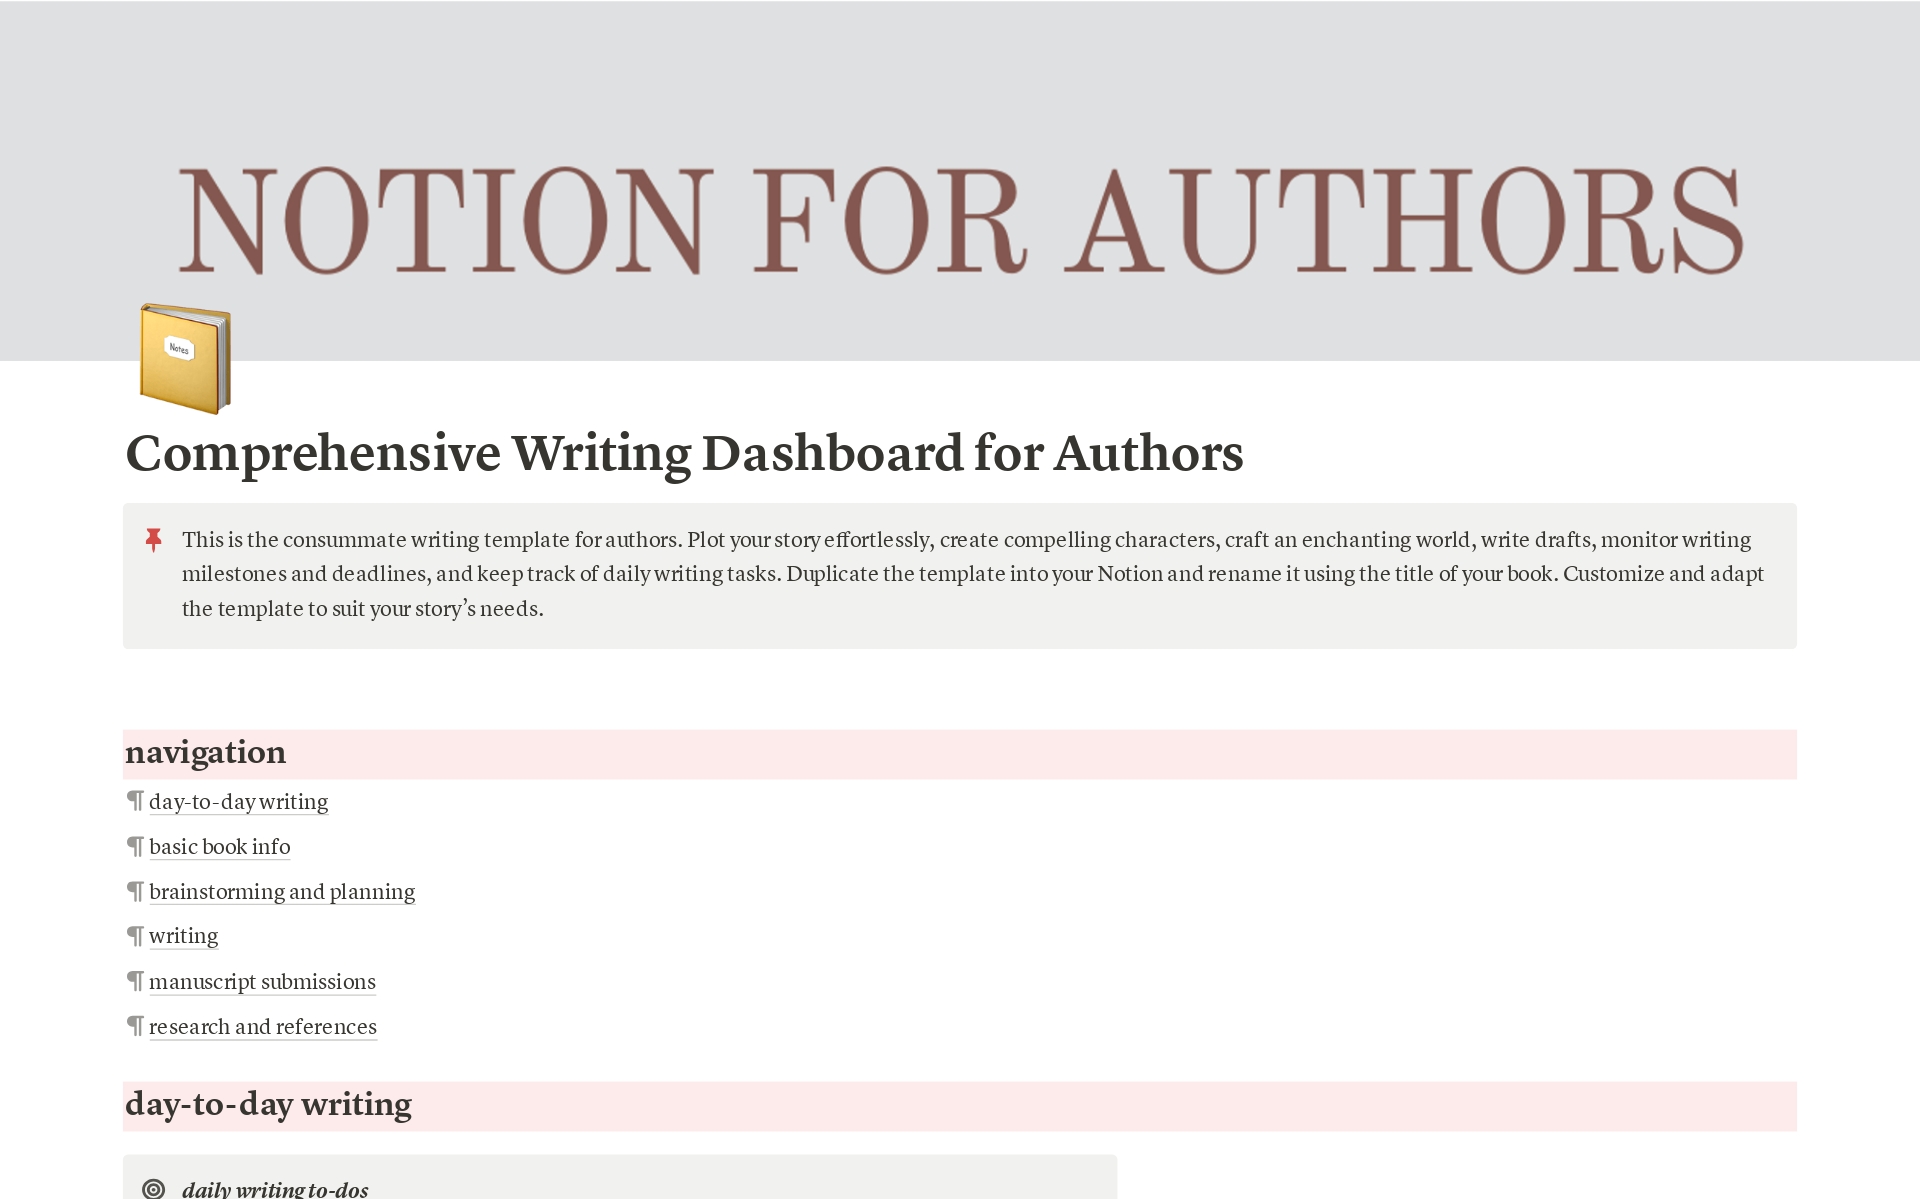 This template is designed to aid authors in all aspects of the writing process. From plotting to worldbuilding and character creation, writers will find this template the perfect writing companion.